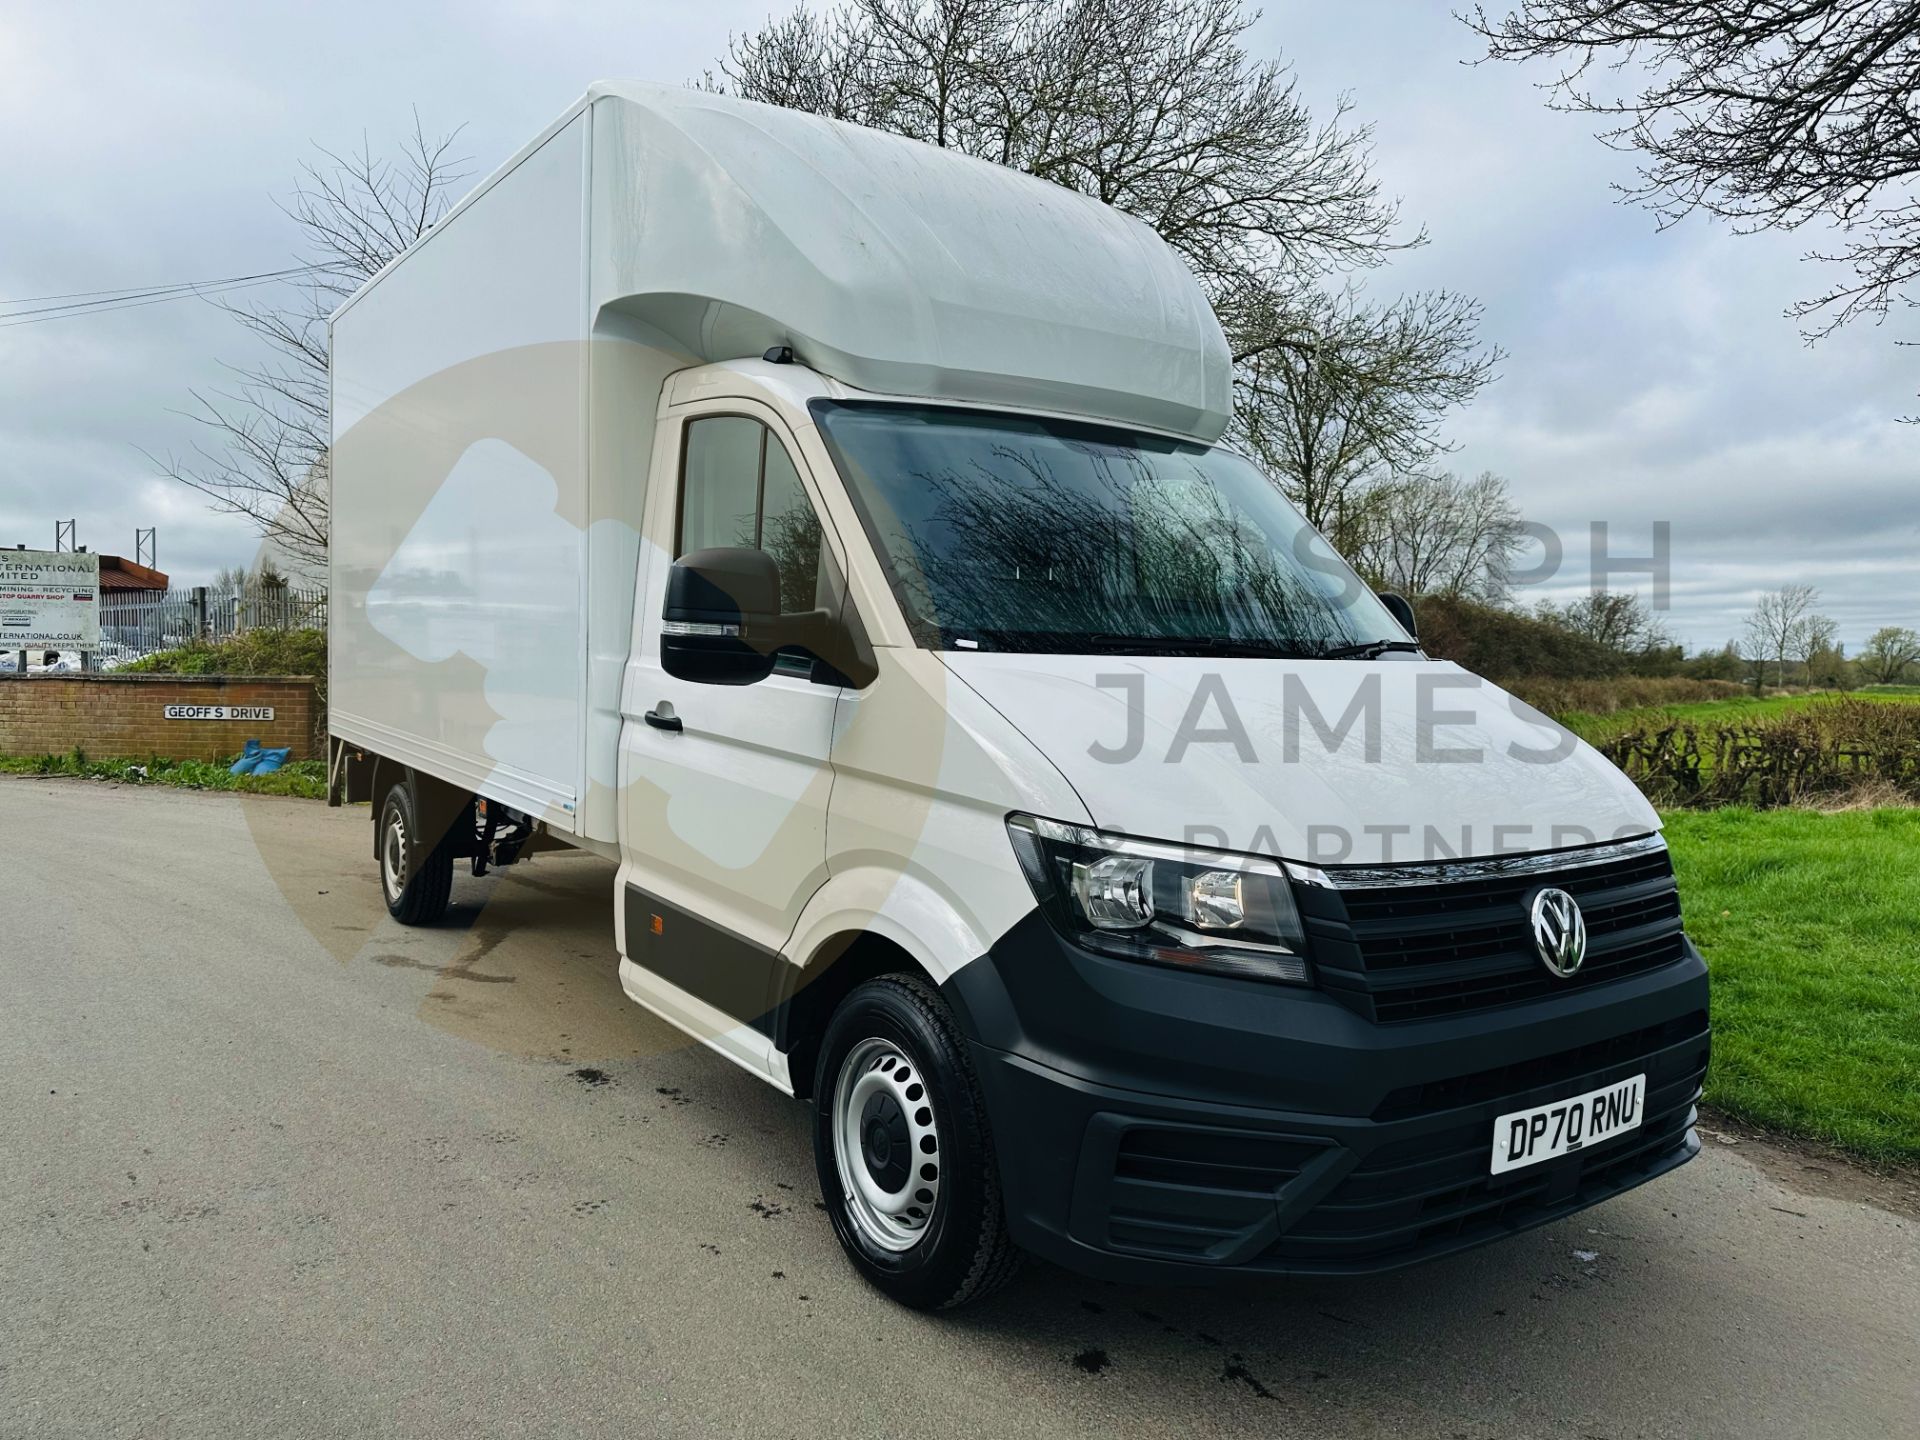 VOLKSWAGEN CRAFTER 2.0 TDI (140) LWB LUTON WITH TAIL LIFT (2021 MODEL) 1 OWNER - LOW MILES - AIR CON - Image 2 of 26